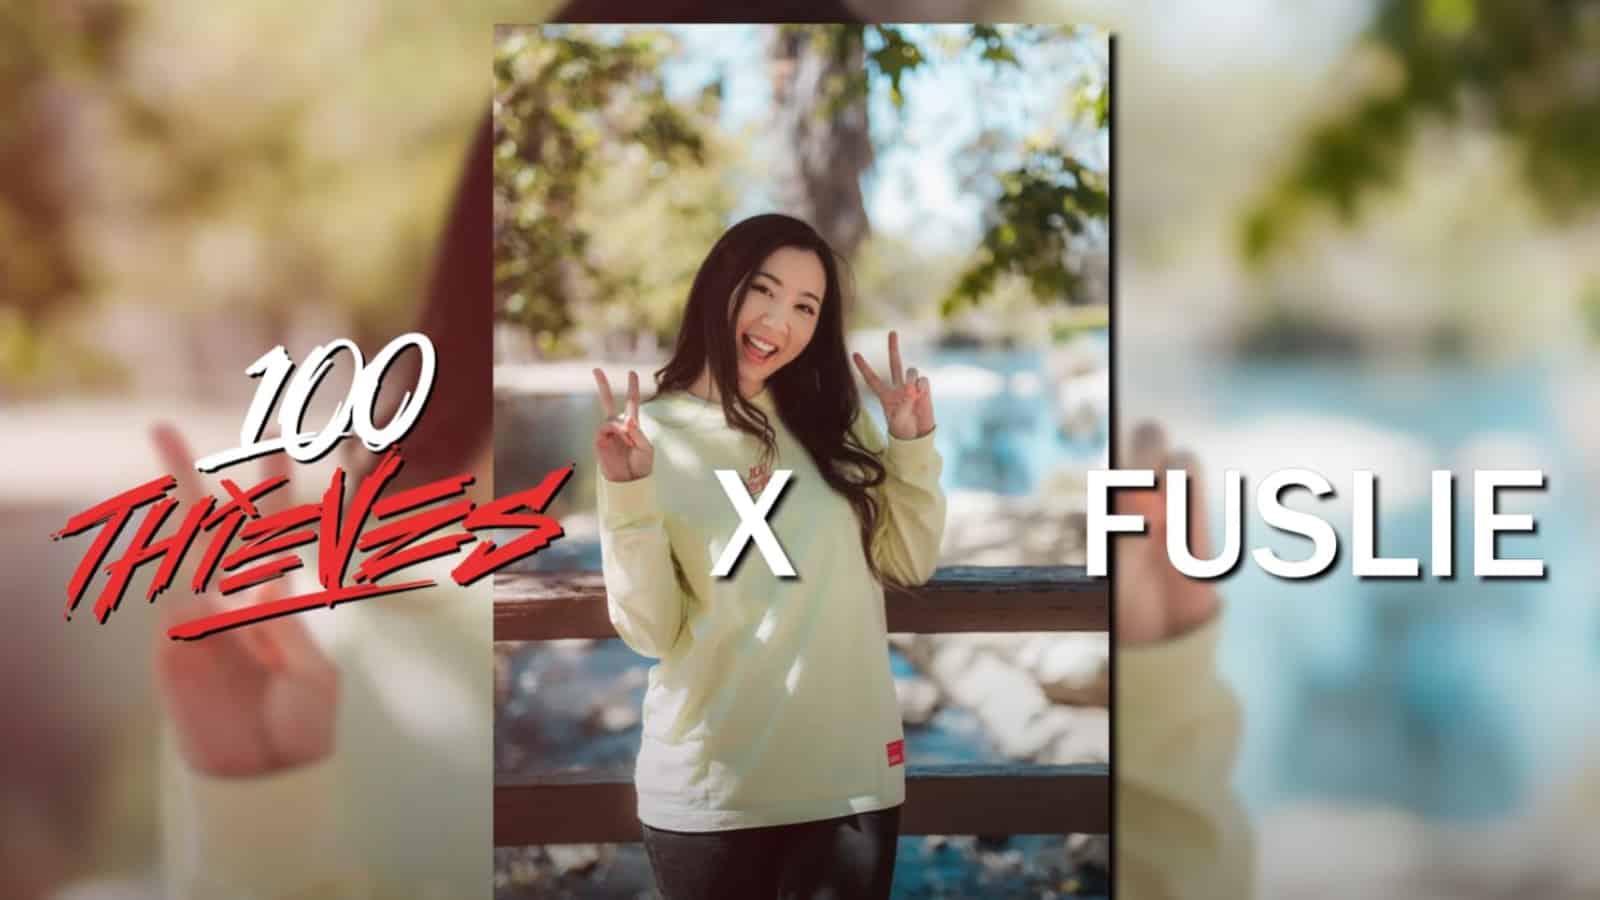 Fuslie joins 100 Thieves